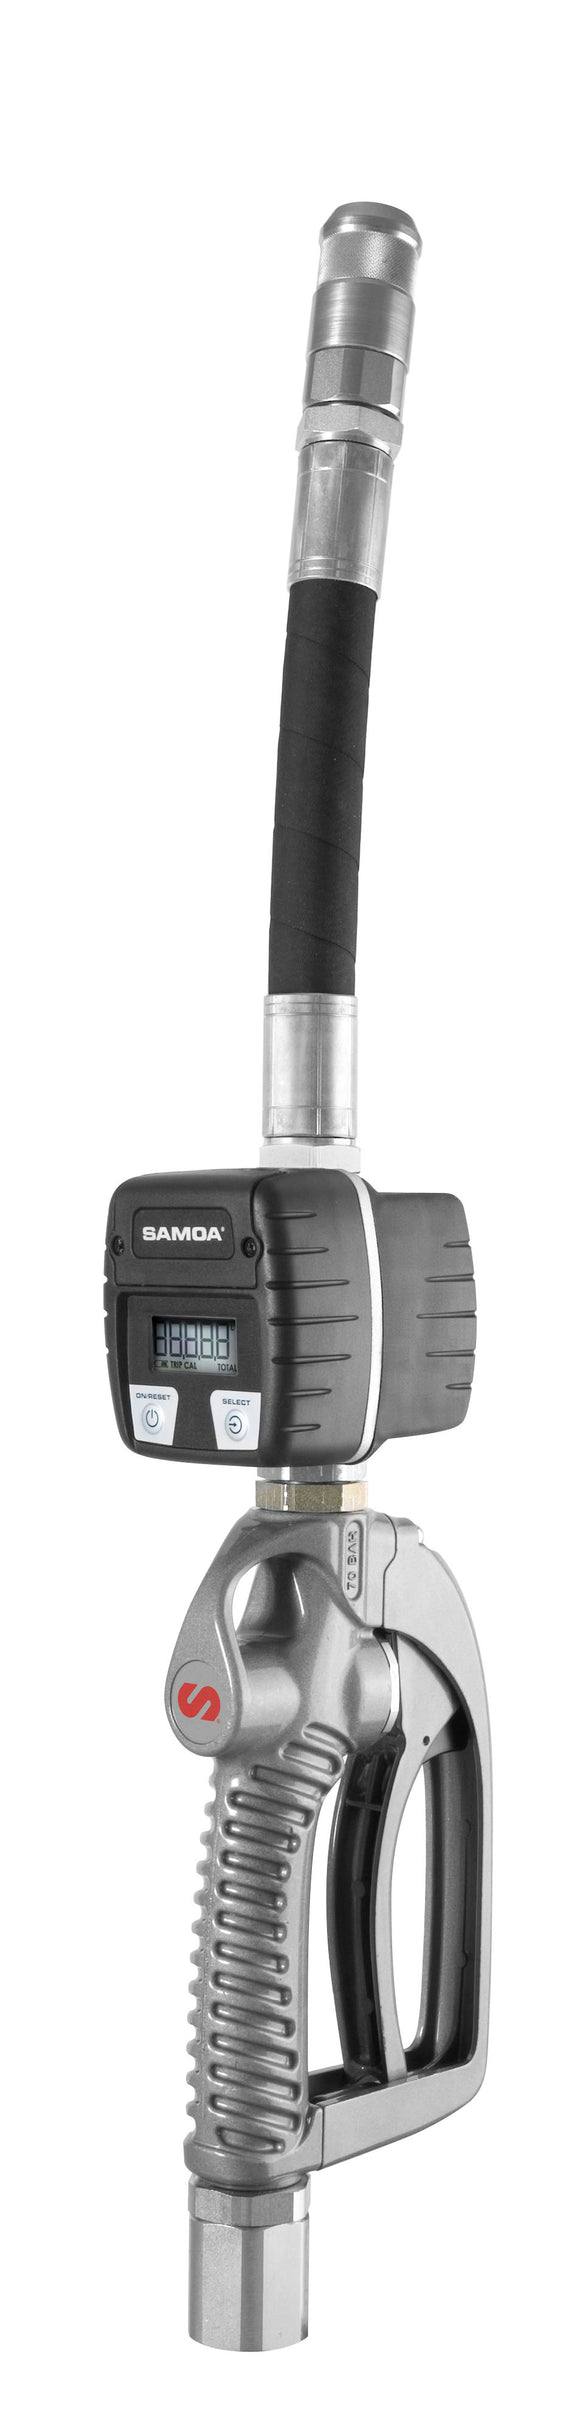 SAMOA Metered High Flow Oil Control Valve with Flexible Outlet with Semi-Auto Non-Drip Tip - 1